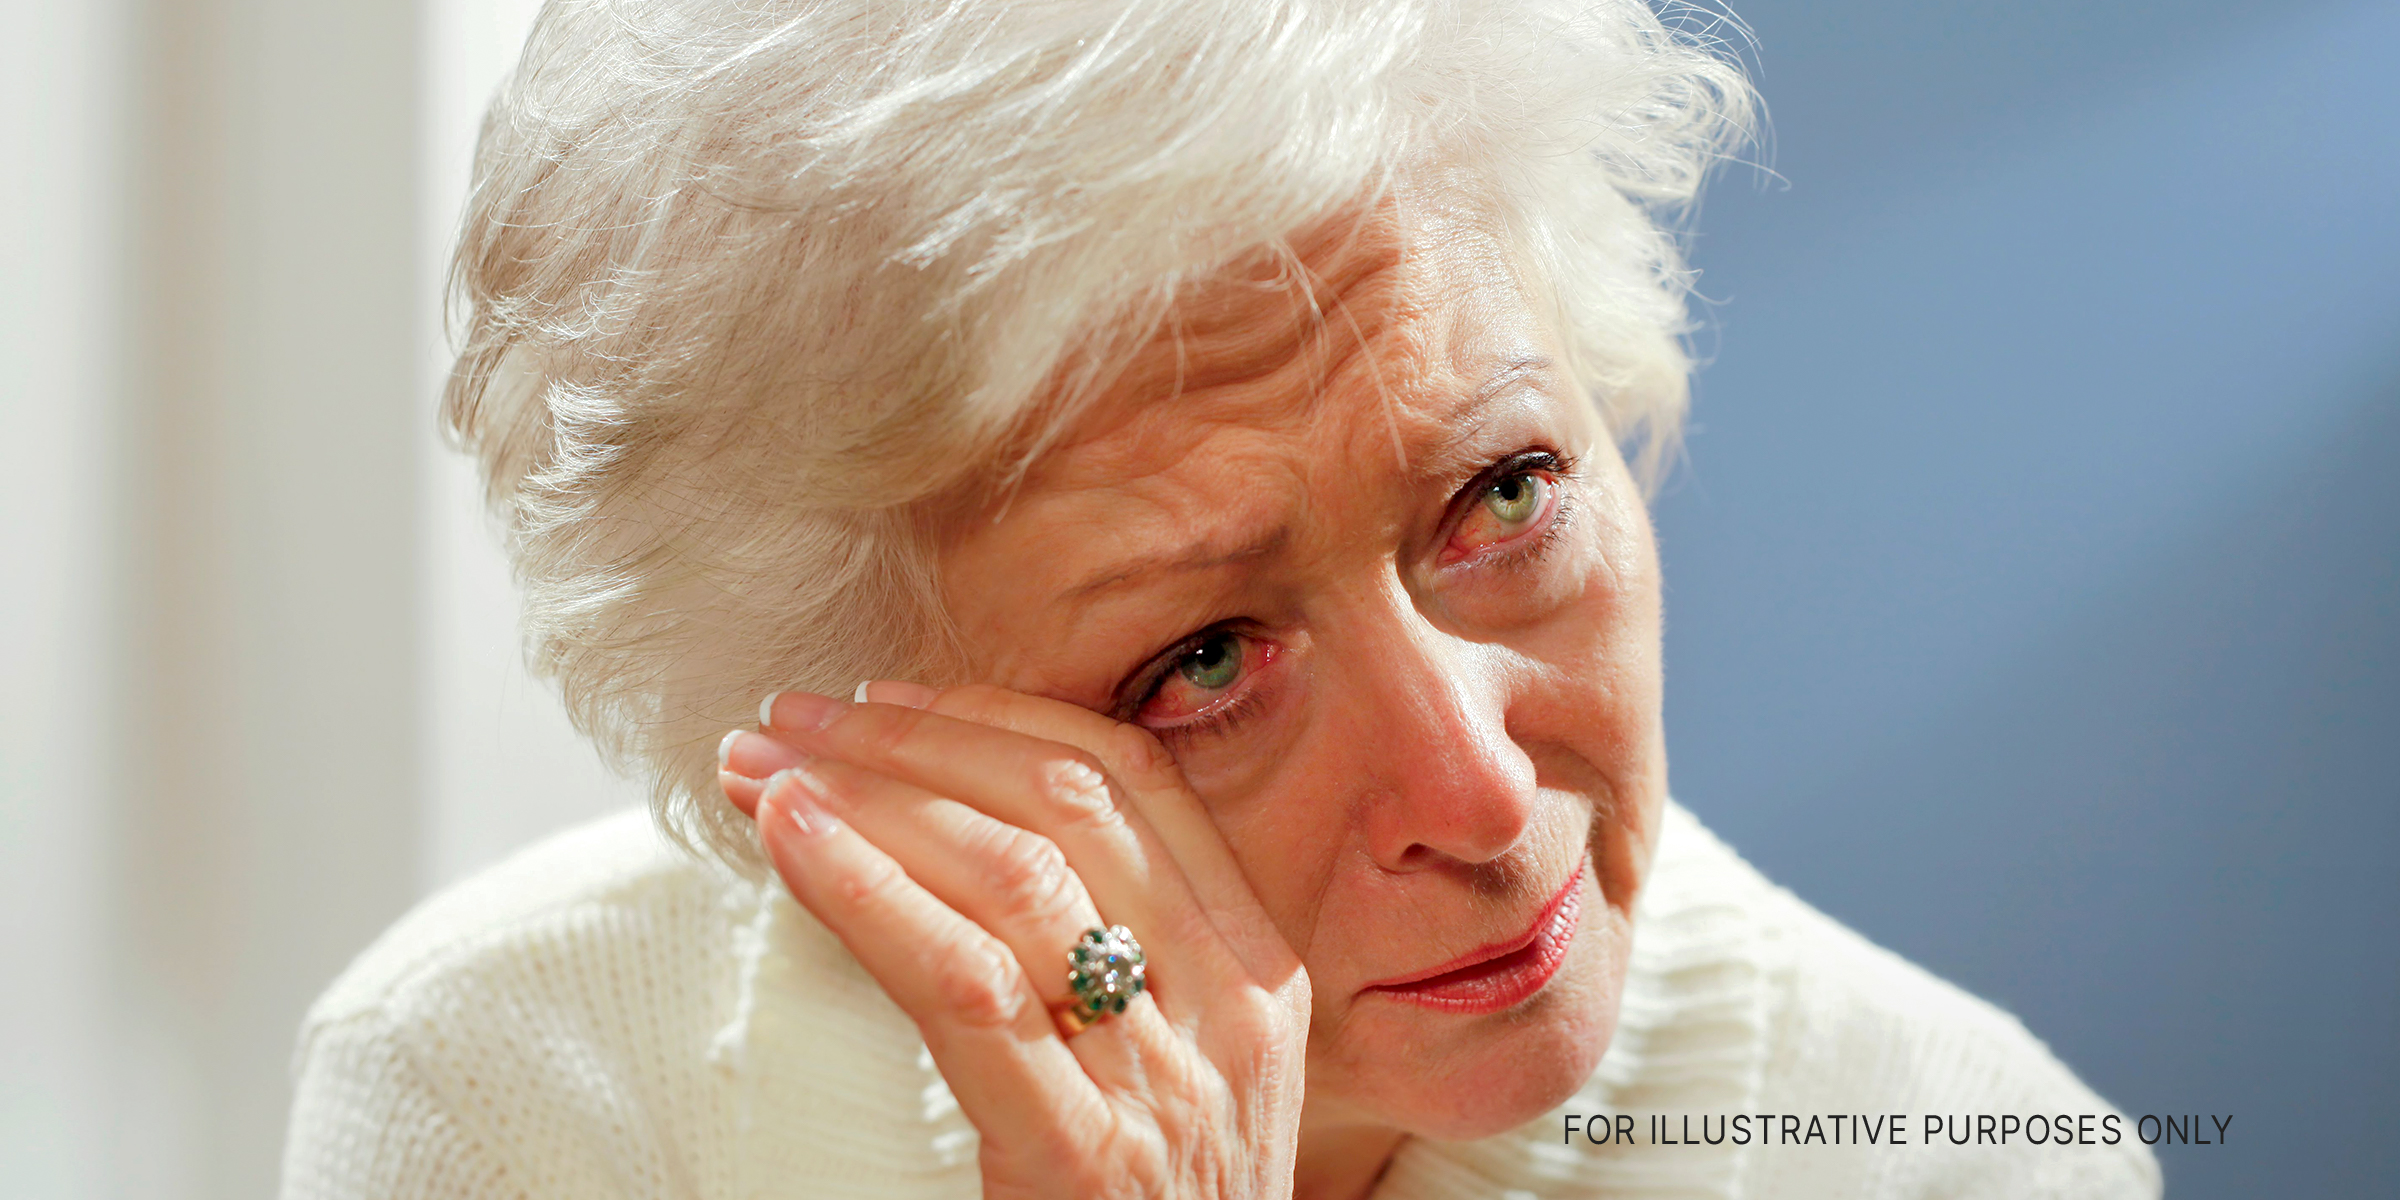 An elderly woman wiping away tears | Source: Getty Images